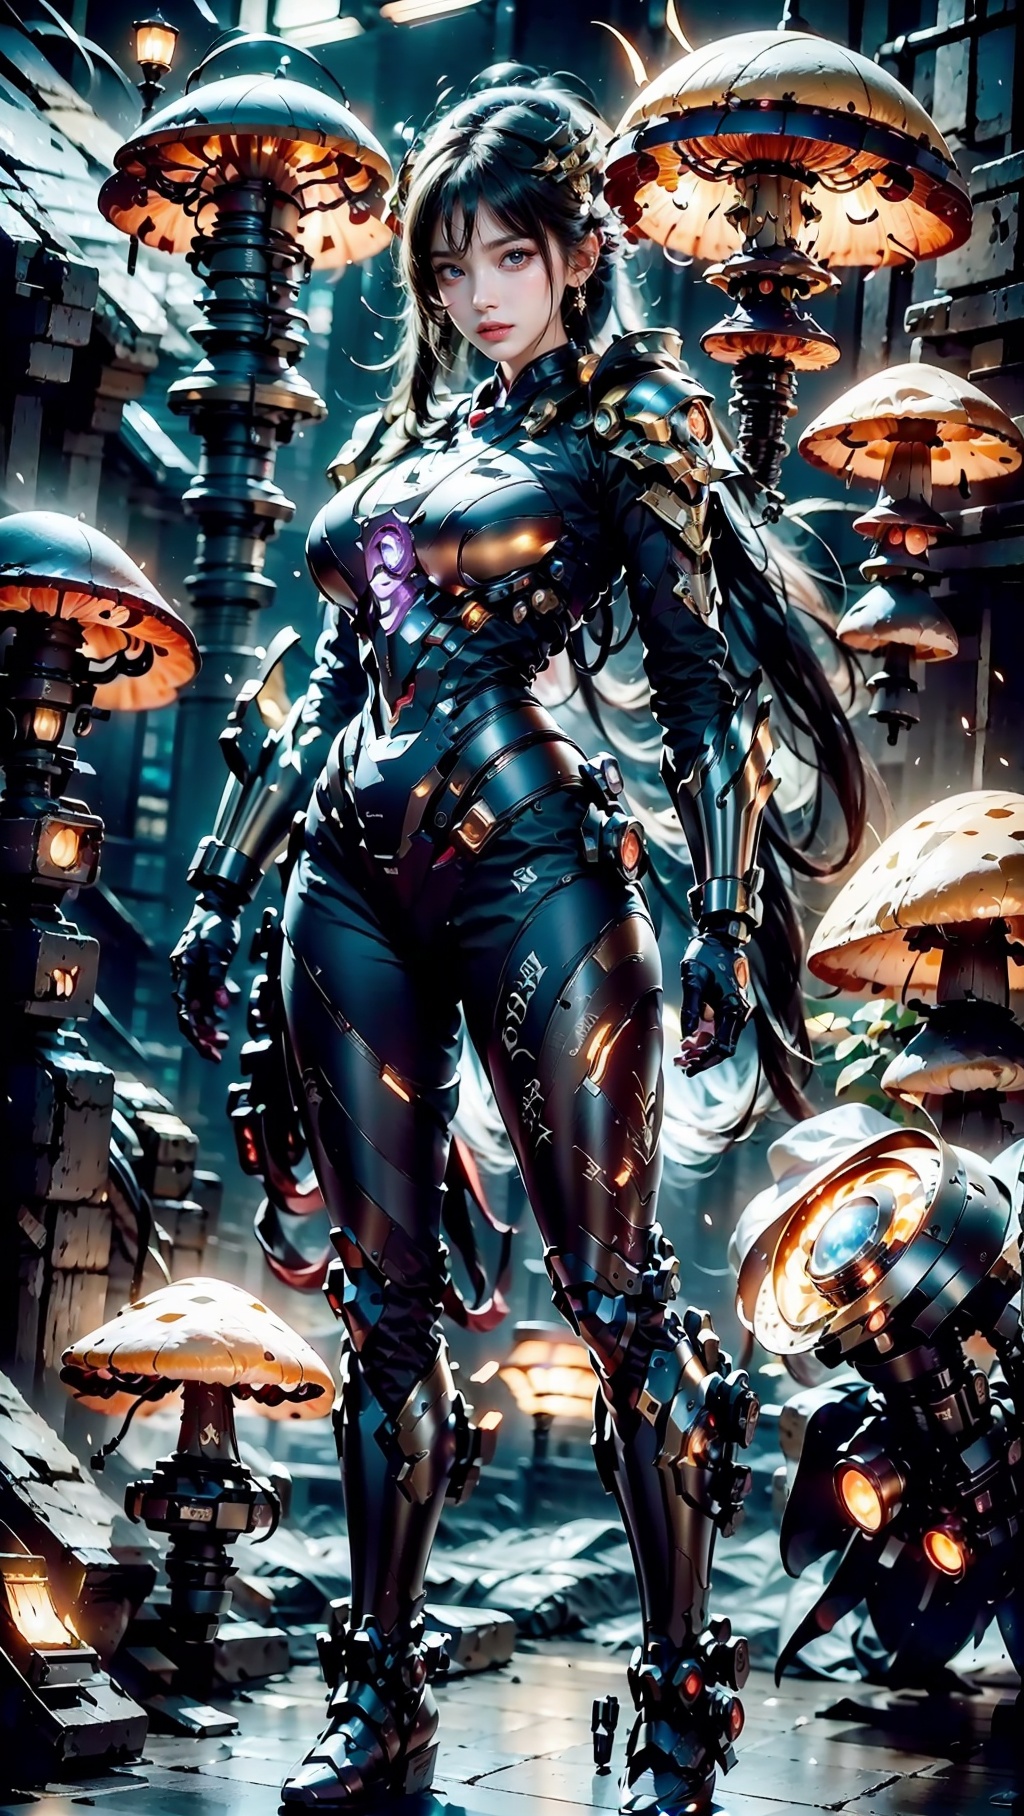 Zerg mecha (Queen), Mushroom Forest, mecha, armor, full body, mechanical arthropods, sharp armor, mushroom forest background, glowing mushrooms, shining mushrooms, multi mushrooms, gloves, complex armor, mecha, mechanical boots, standing, black long hair, sharp fingers, terrifying hand weapons, abnormal hands, mechanical spider legs behind, single ponytail, semi exposed thighs, ground, outdoor, blurry background, The purple glowing spot at the knee, 1girl, glow, cyberhanfu, mech